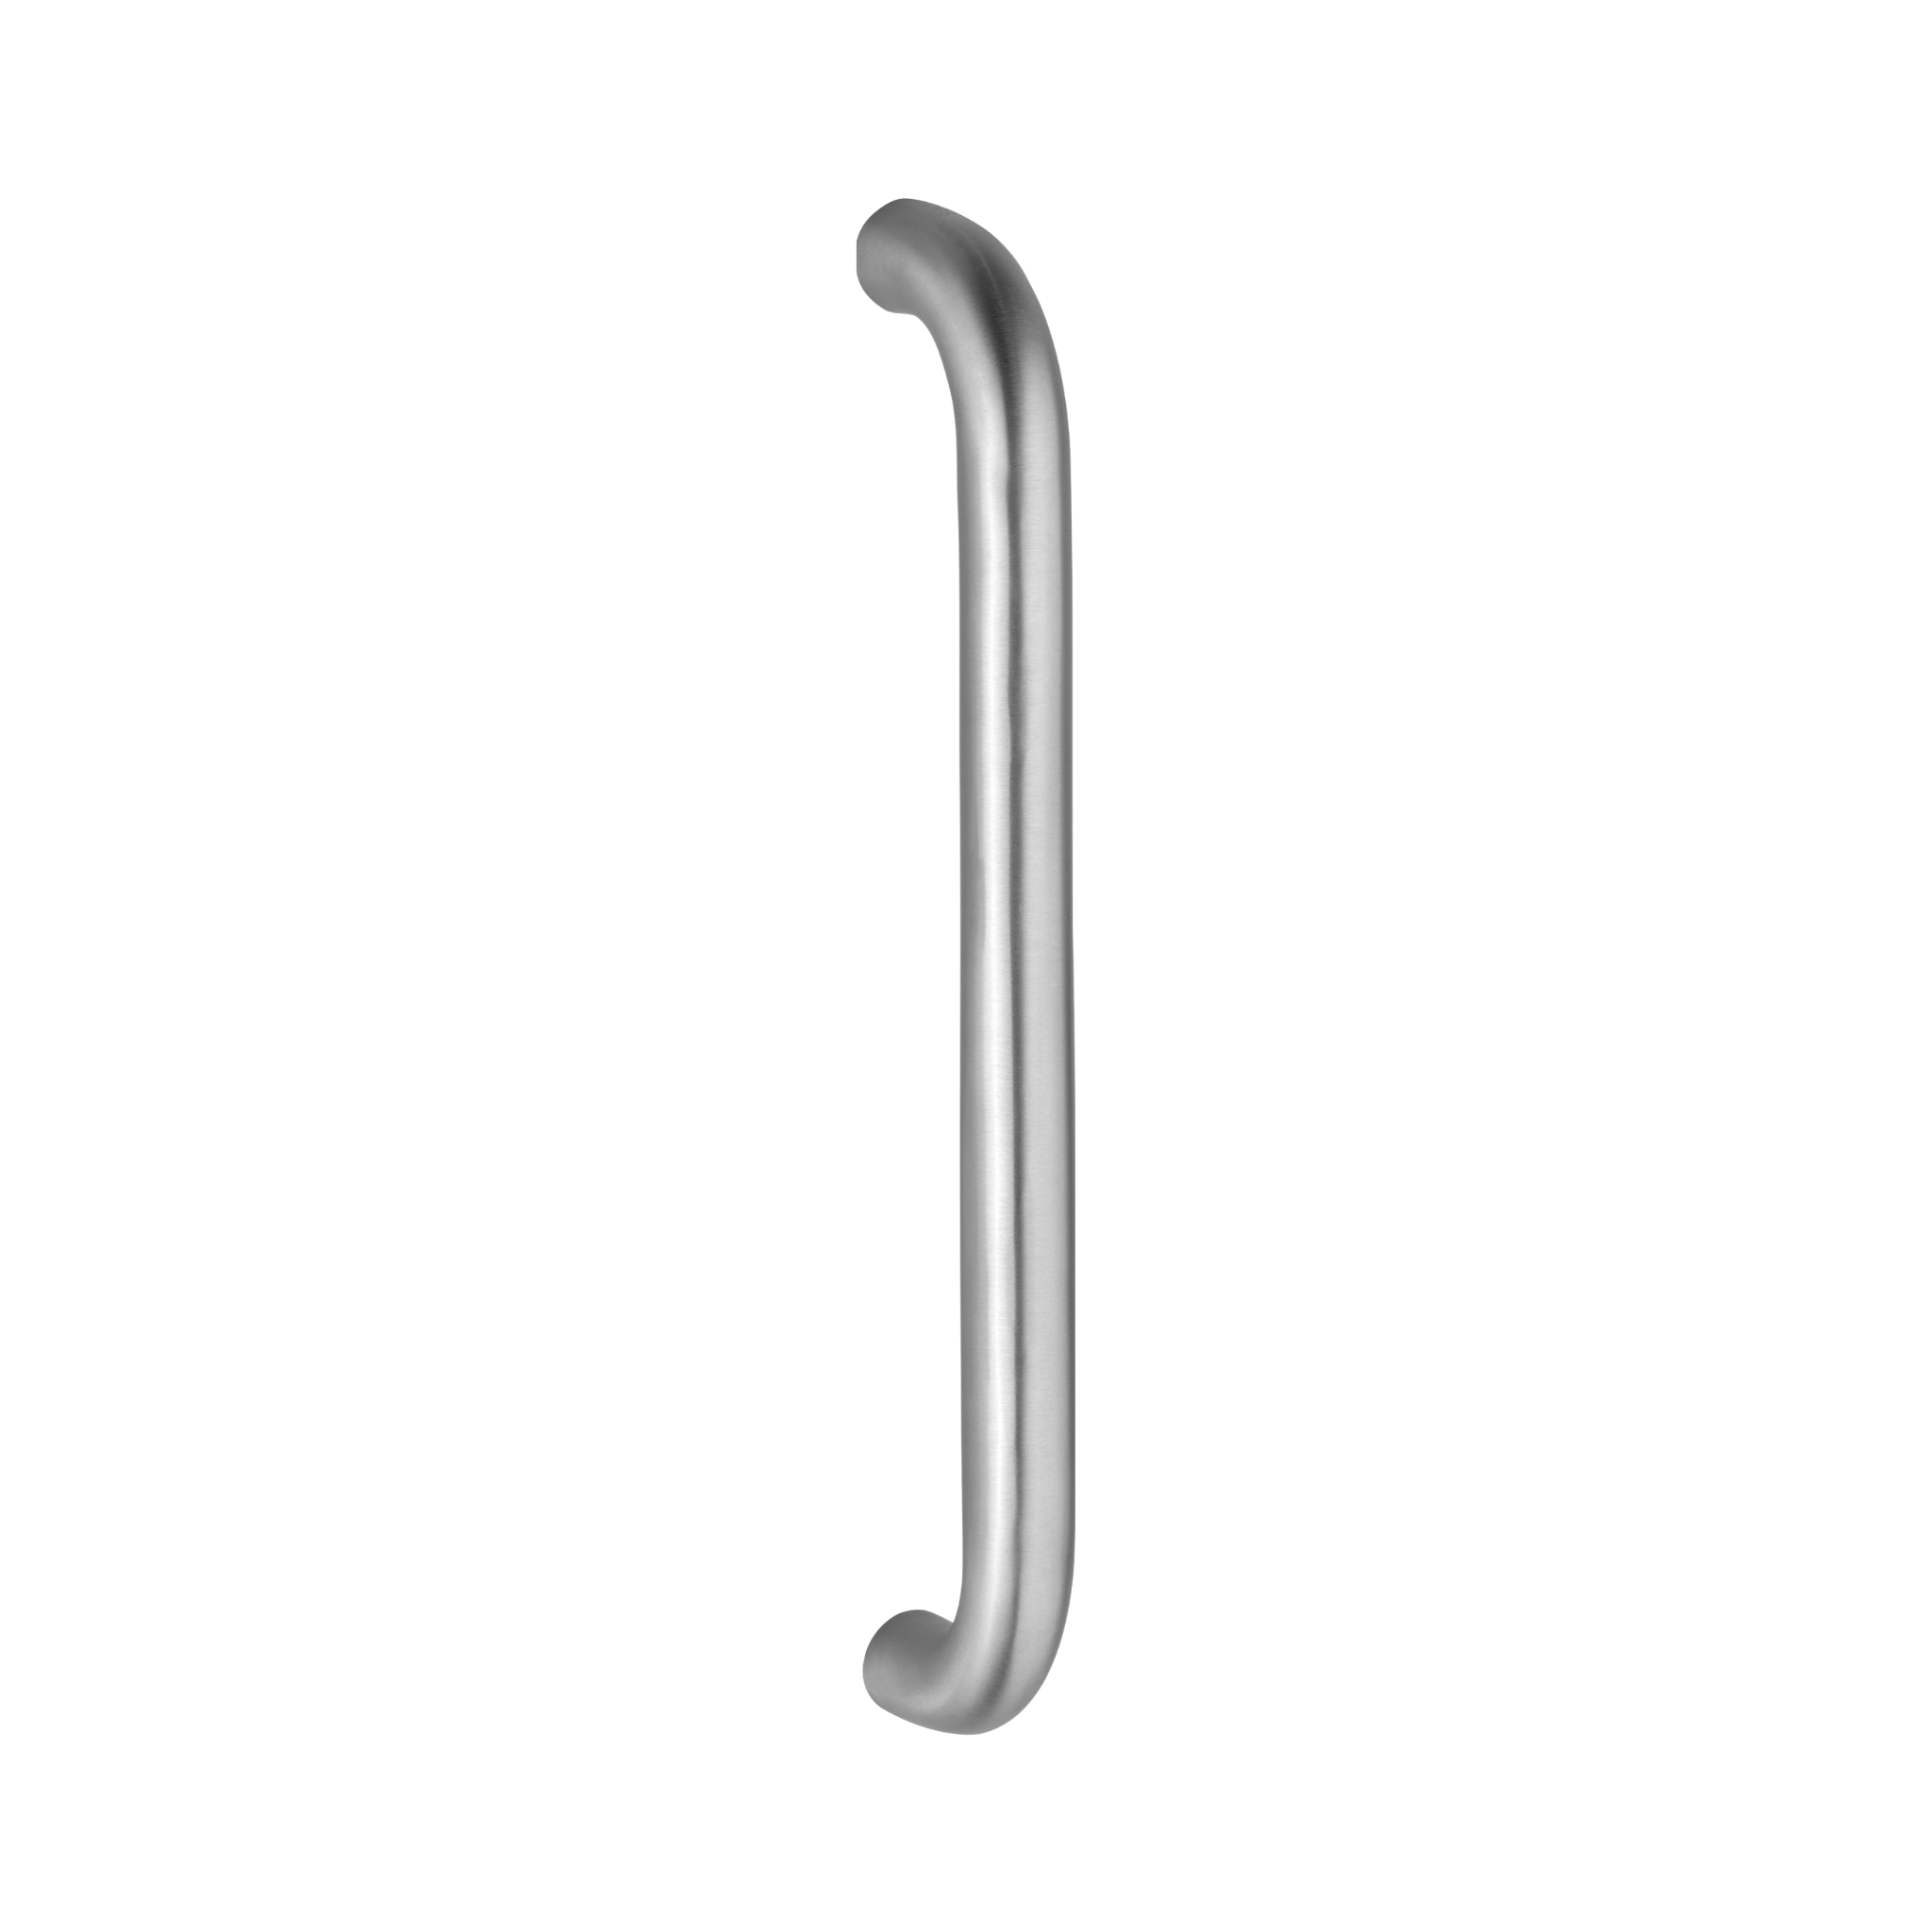 FP.D09.BB.TR, Pull Handle, Tubular, D Handle, BTB, 32mm (Ø) x 400mm (l) x 368mm (ctc), Stainless Steel with Tarnish Resistant, CISA